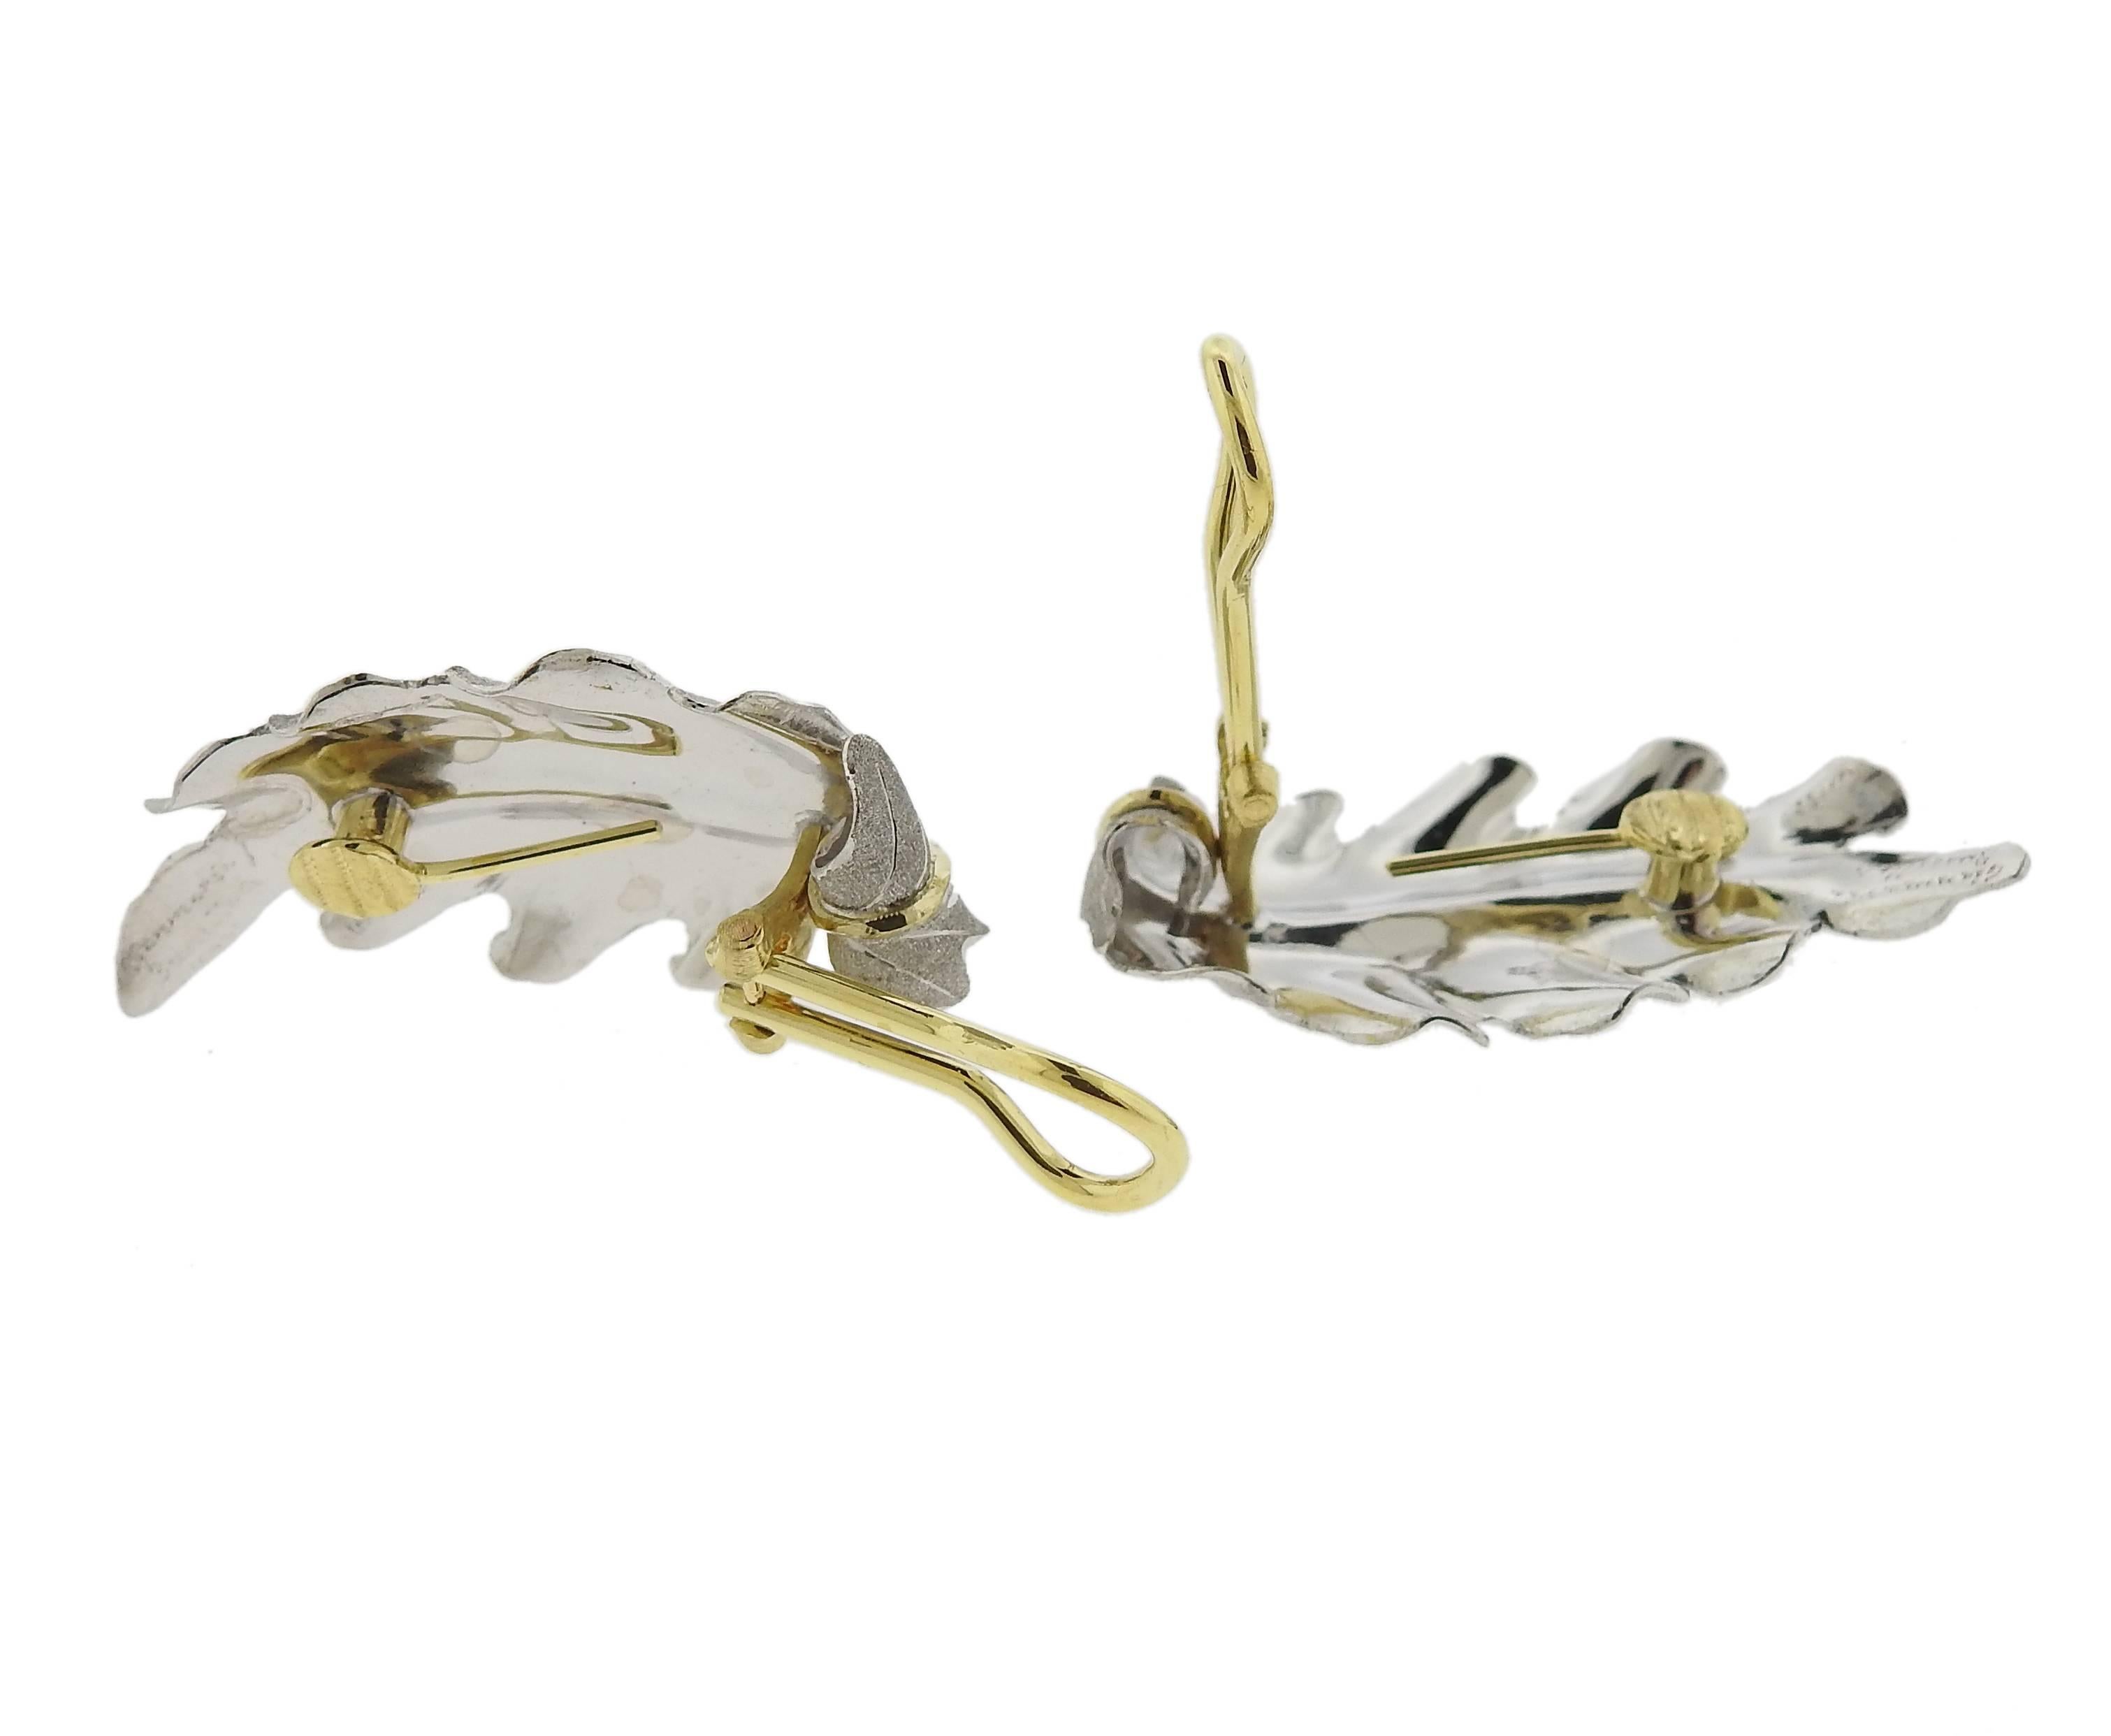 Pair of large leaf earrings, crafted by Buccellati, set in sterling silver and 18k yellow gold. Earrings are 35mm x 20mm  and weigh 10.3 grams. Marked: Gianmaria Buccellati, Italy, 925, 18k , W1580.
Retail 5330